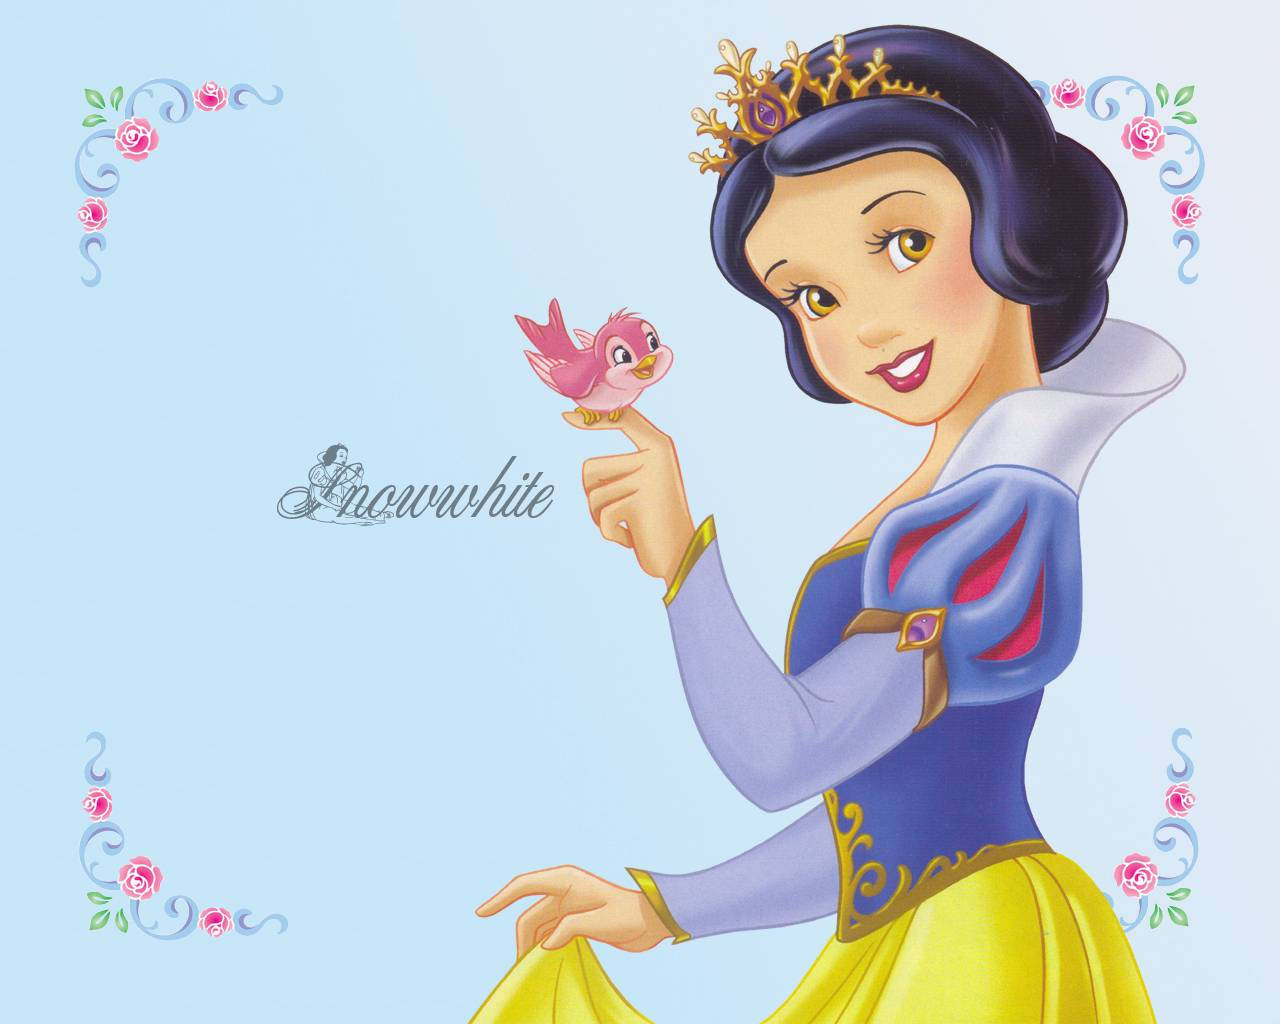 Snow White Graphic Poster Background